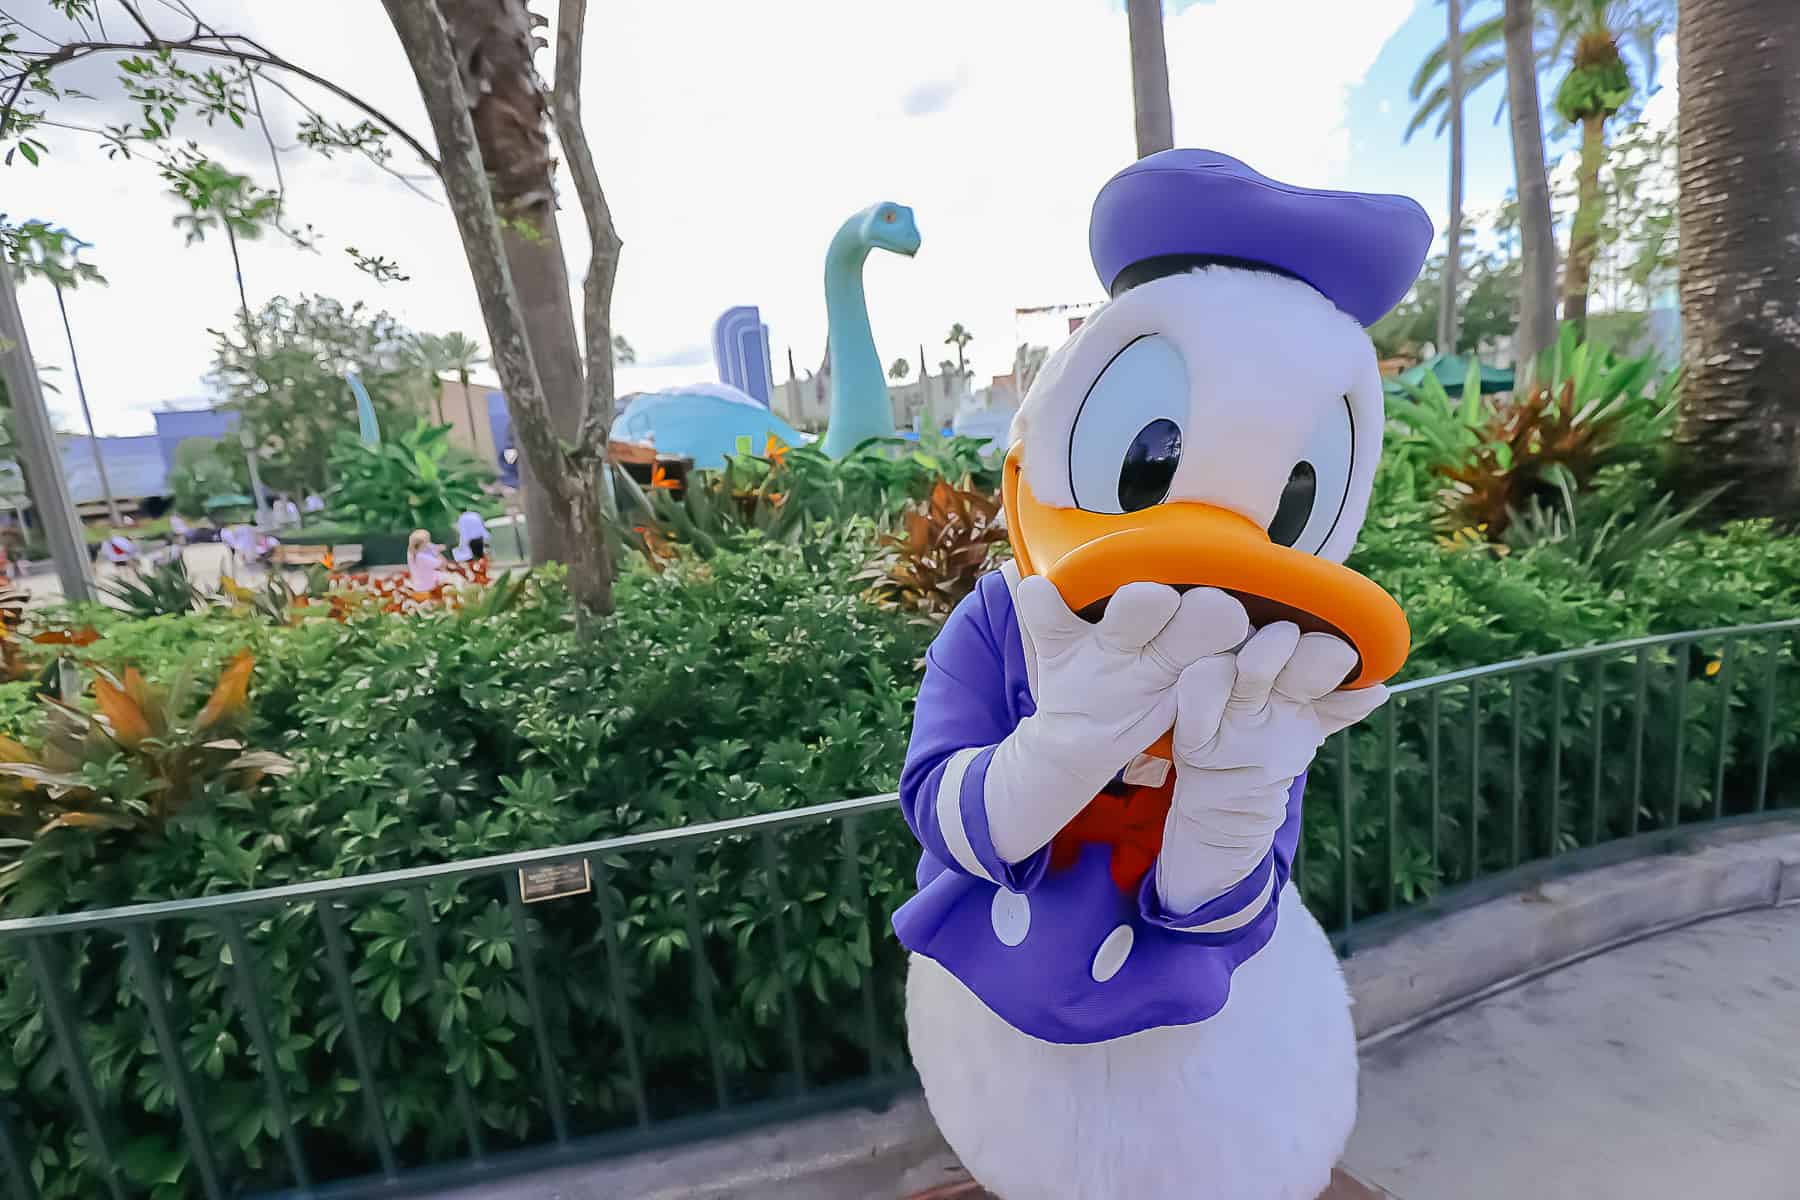 Donald with a laugh expression with hands over mouth. 